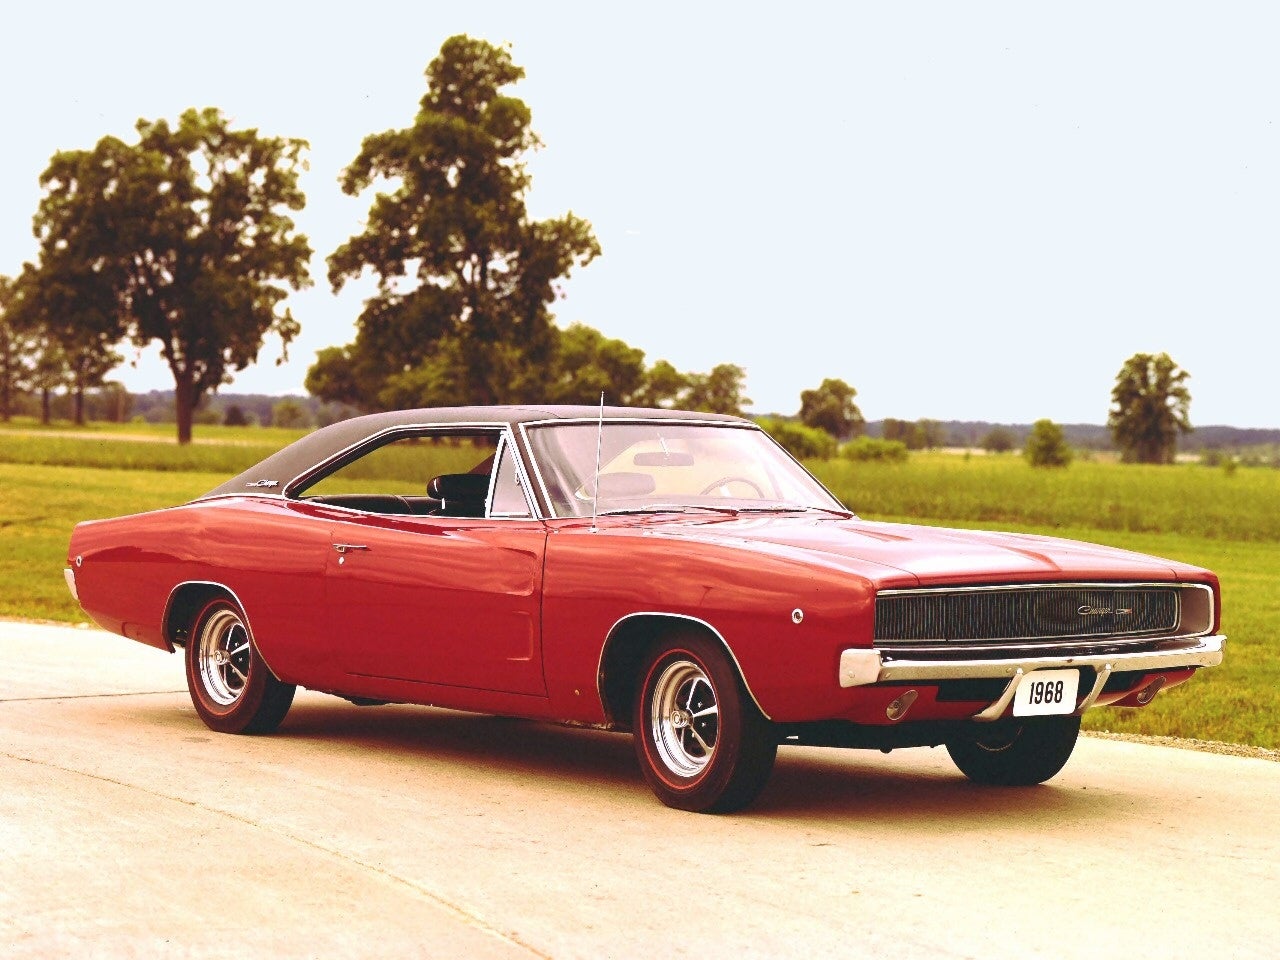 https://static.cargurus.com/images/site/2007/03/30/17/33/1968_dodge_charger-pic-61303-1600x1200.jpeg